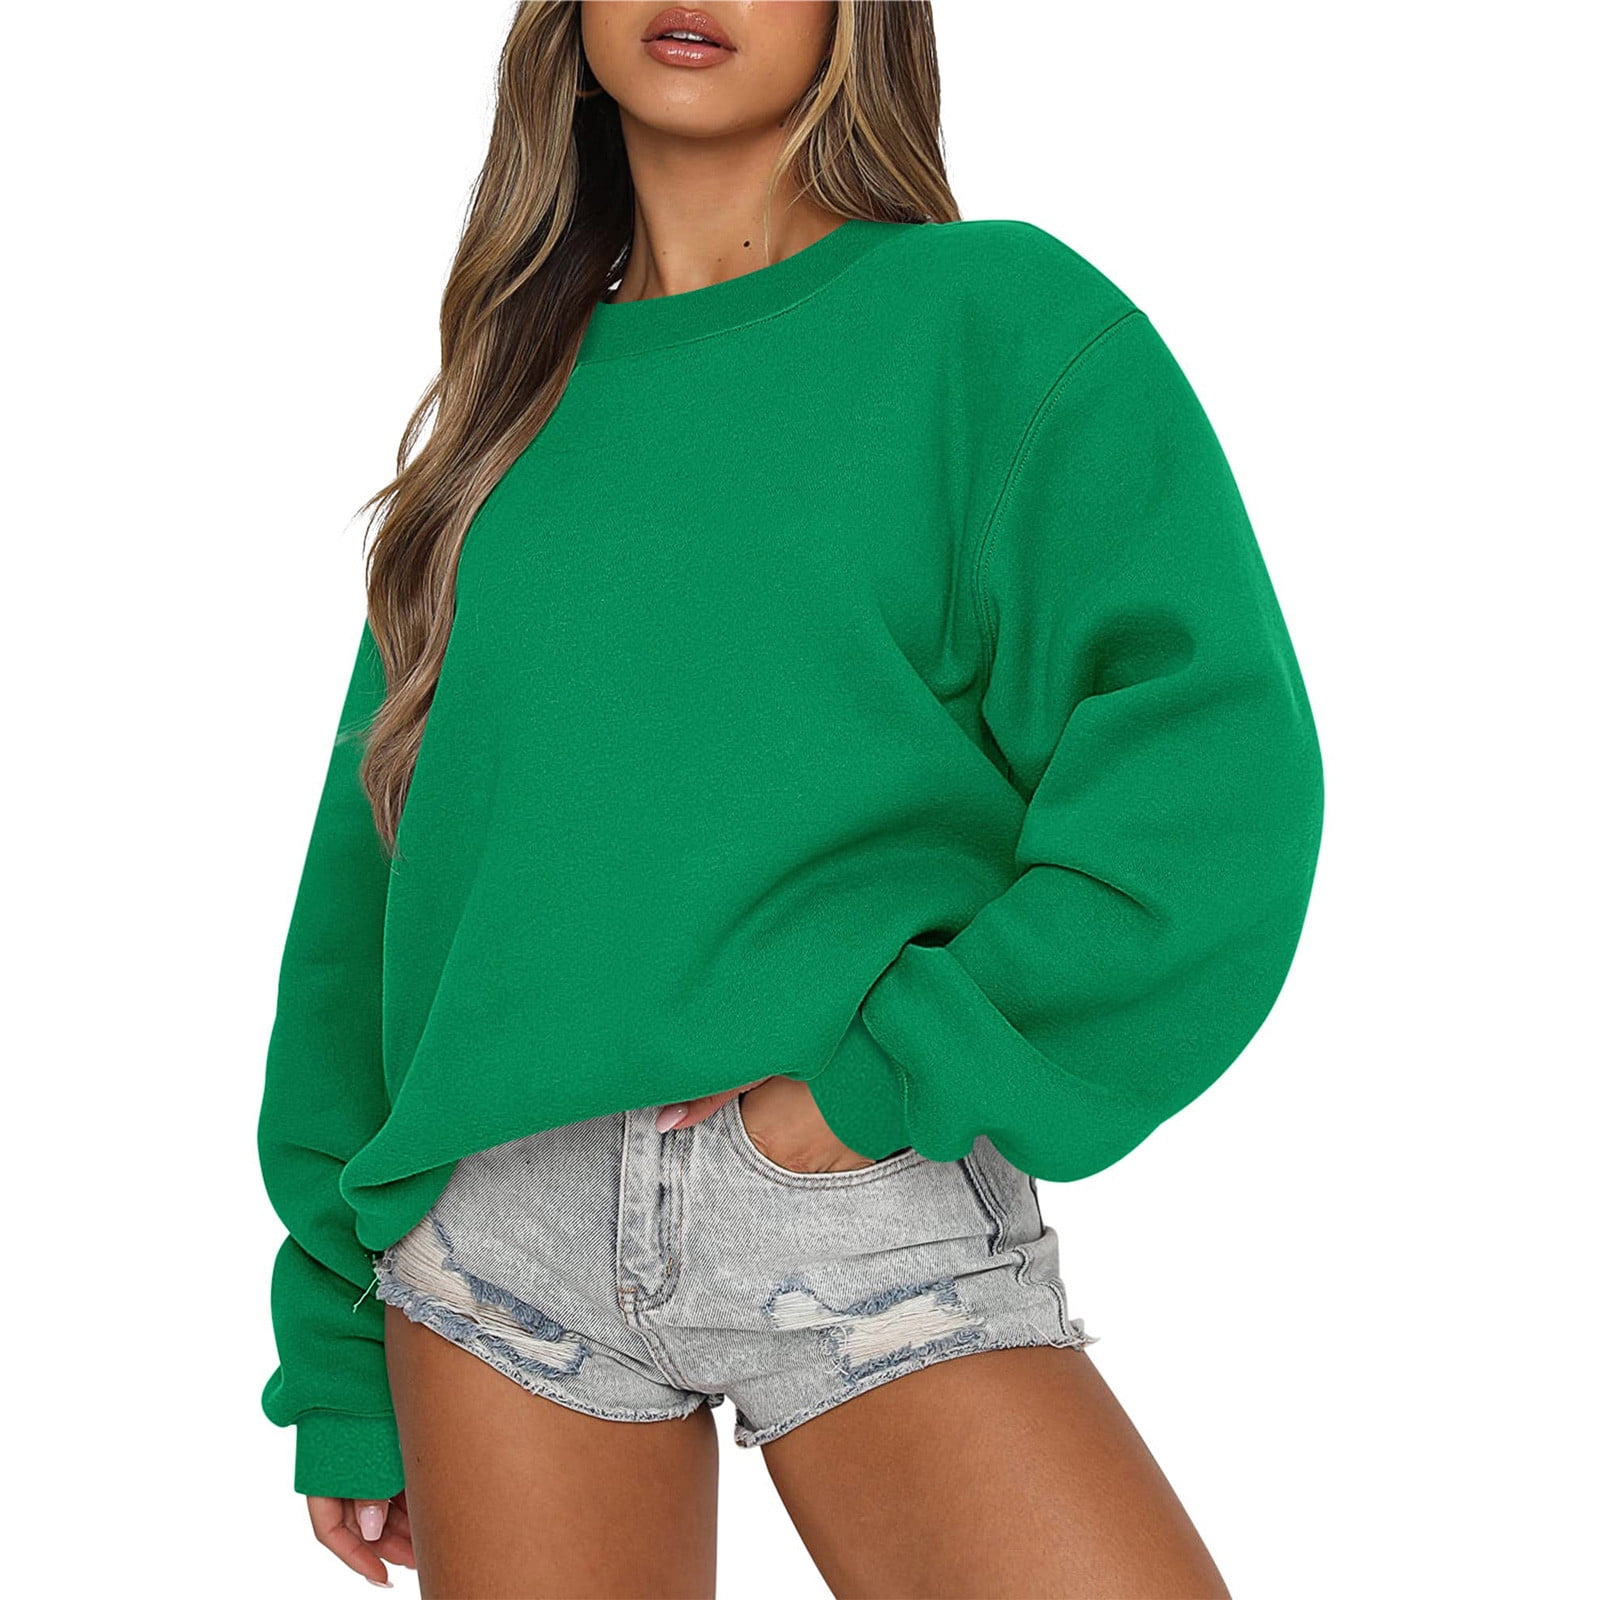 Aueoeo Sweatshirt for Womens Fashion, Women's Casual Long Sleeve Crewneck  Sweatshirt Solid Color Ladies Loose Fit Pullover Tops Blouse 